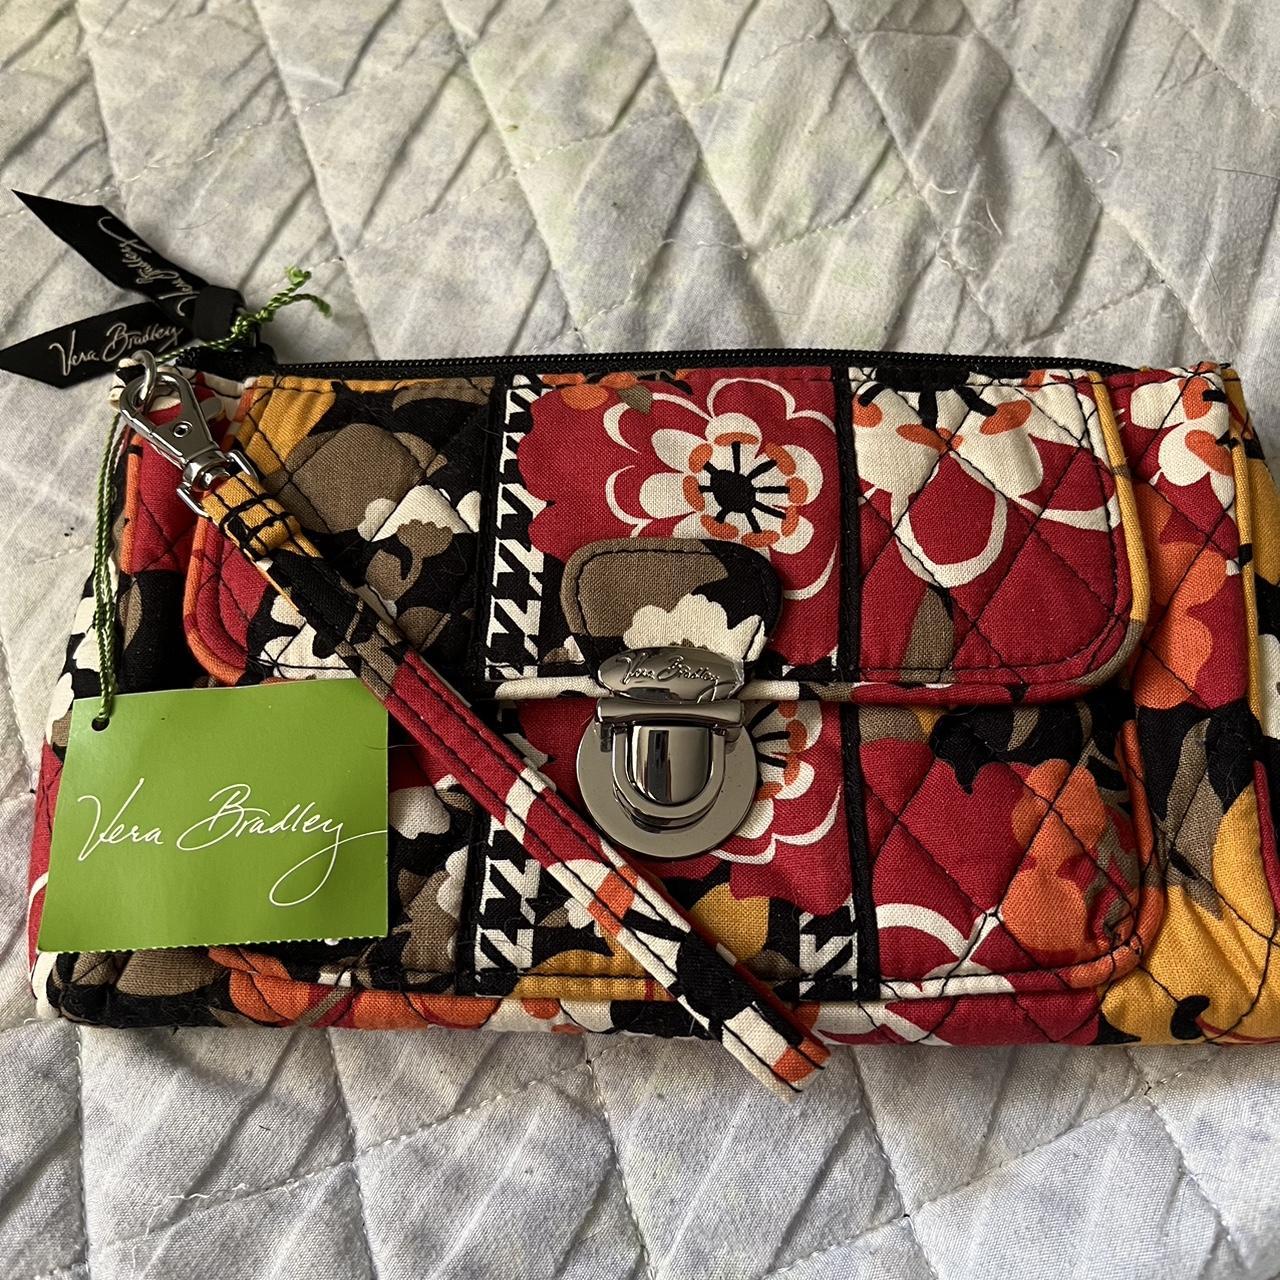 Vera Bradley: Bags From $55 | Eastview Mall